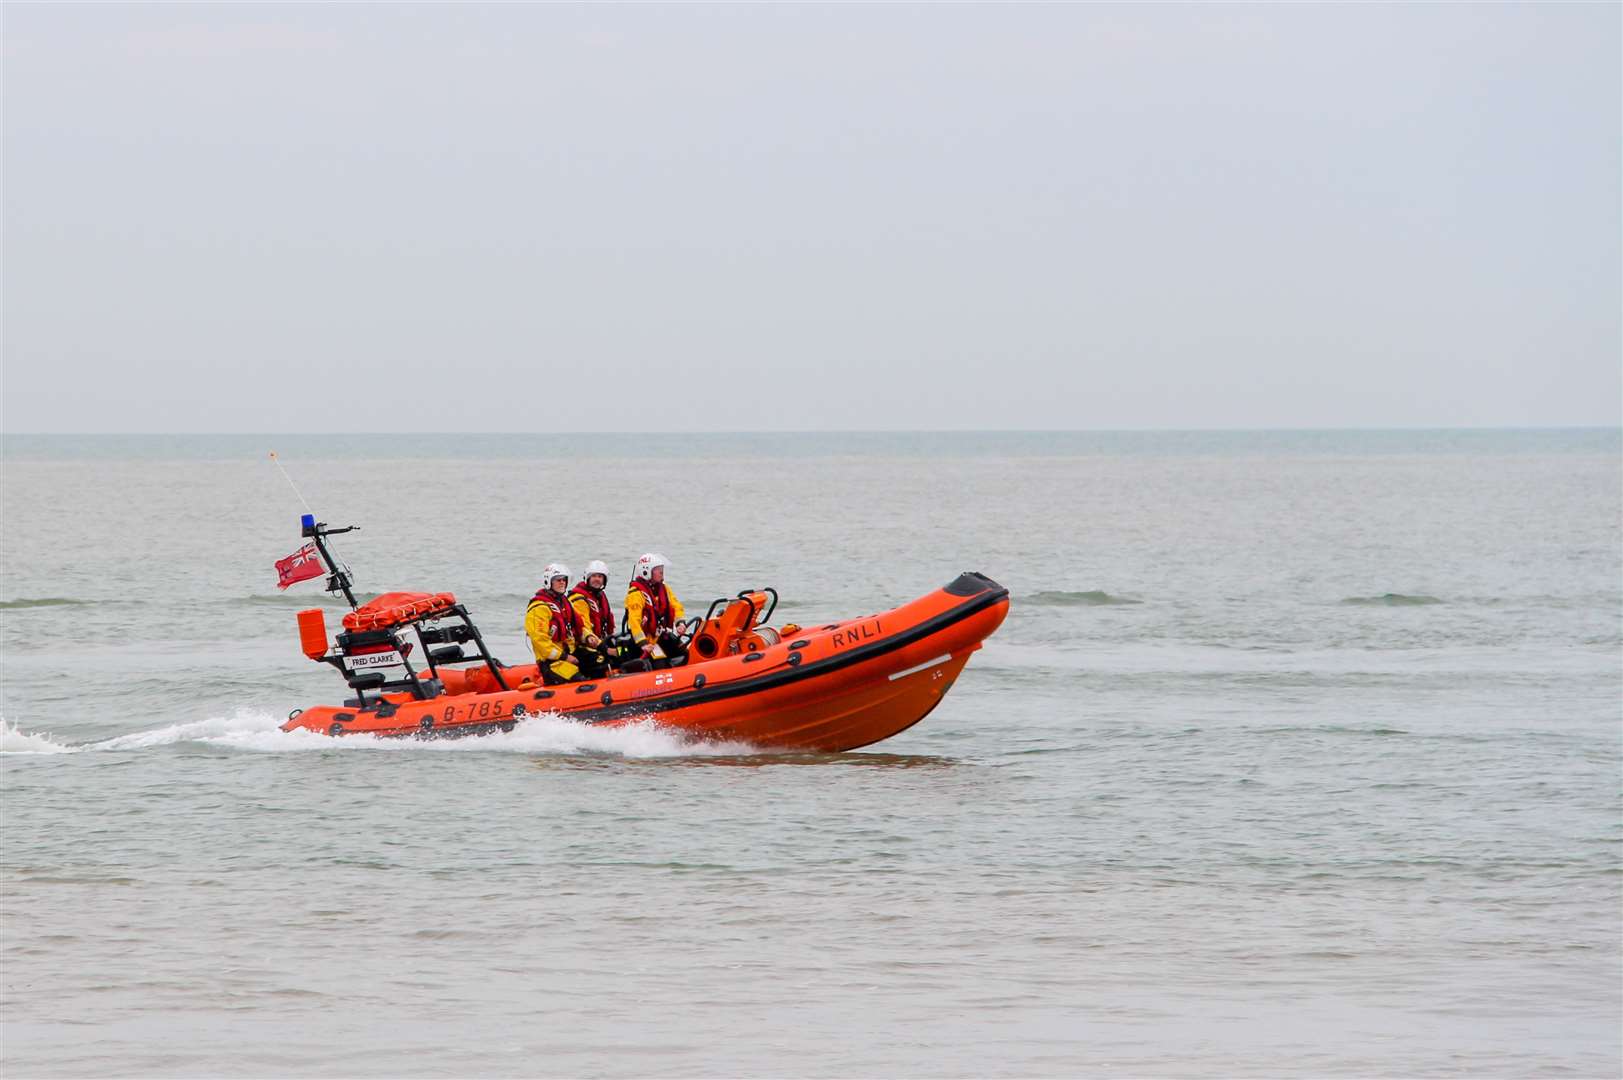 The RNLI helped in the rescue